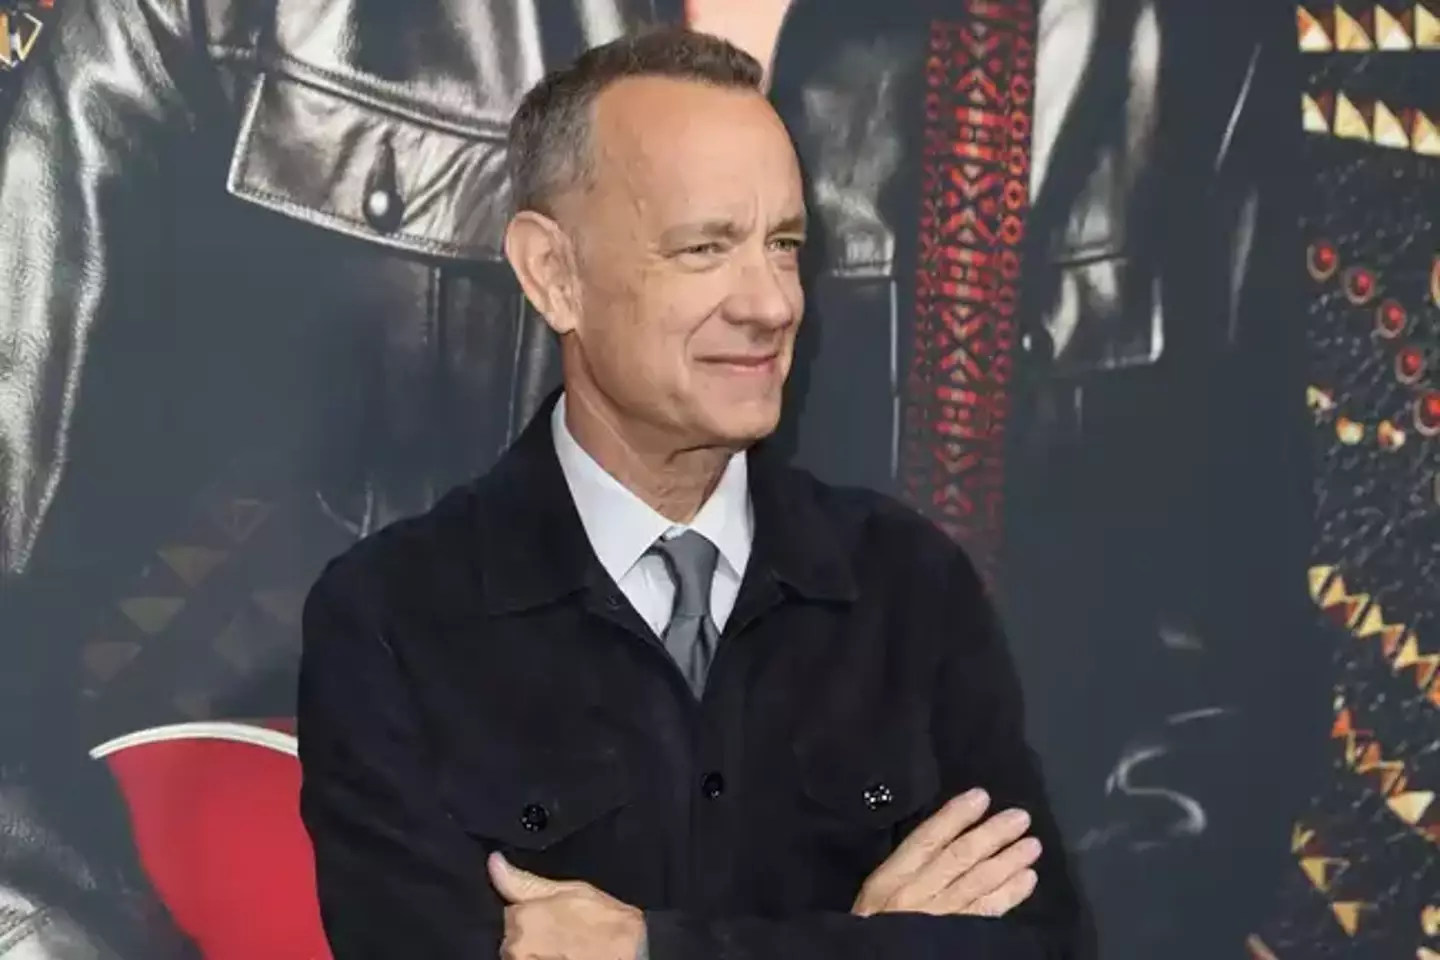 You don't want to piss Tom Hanks off...